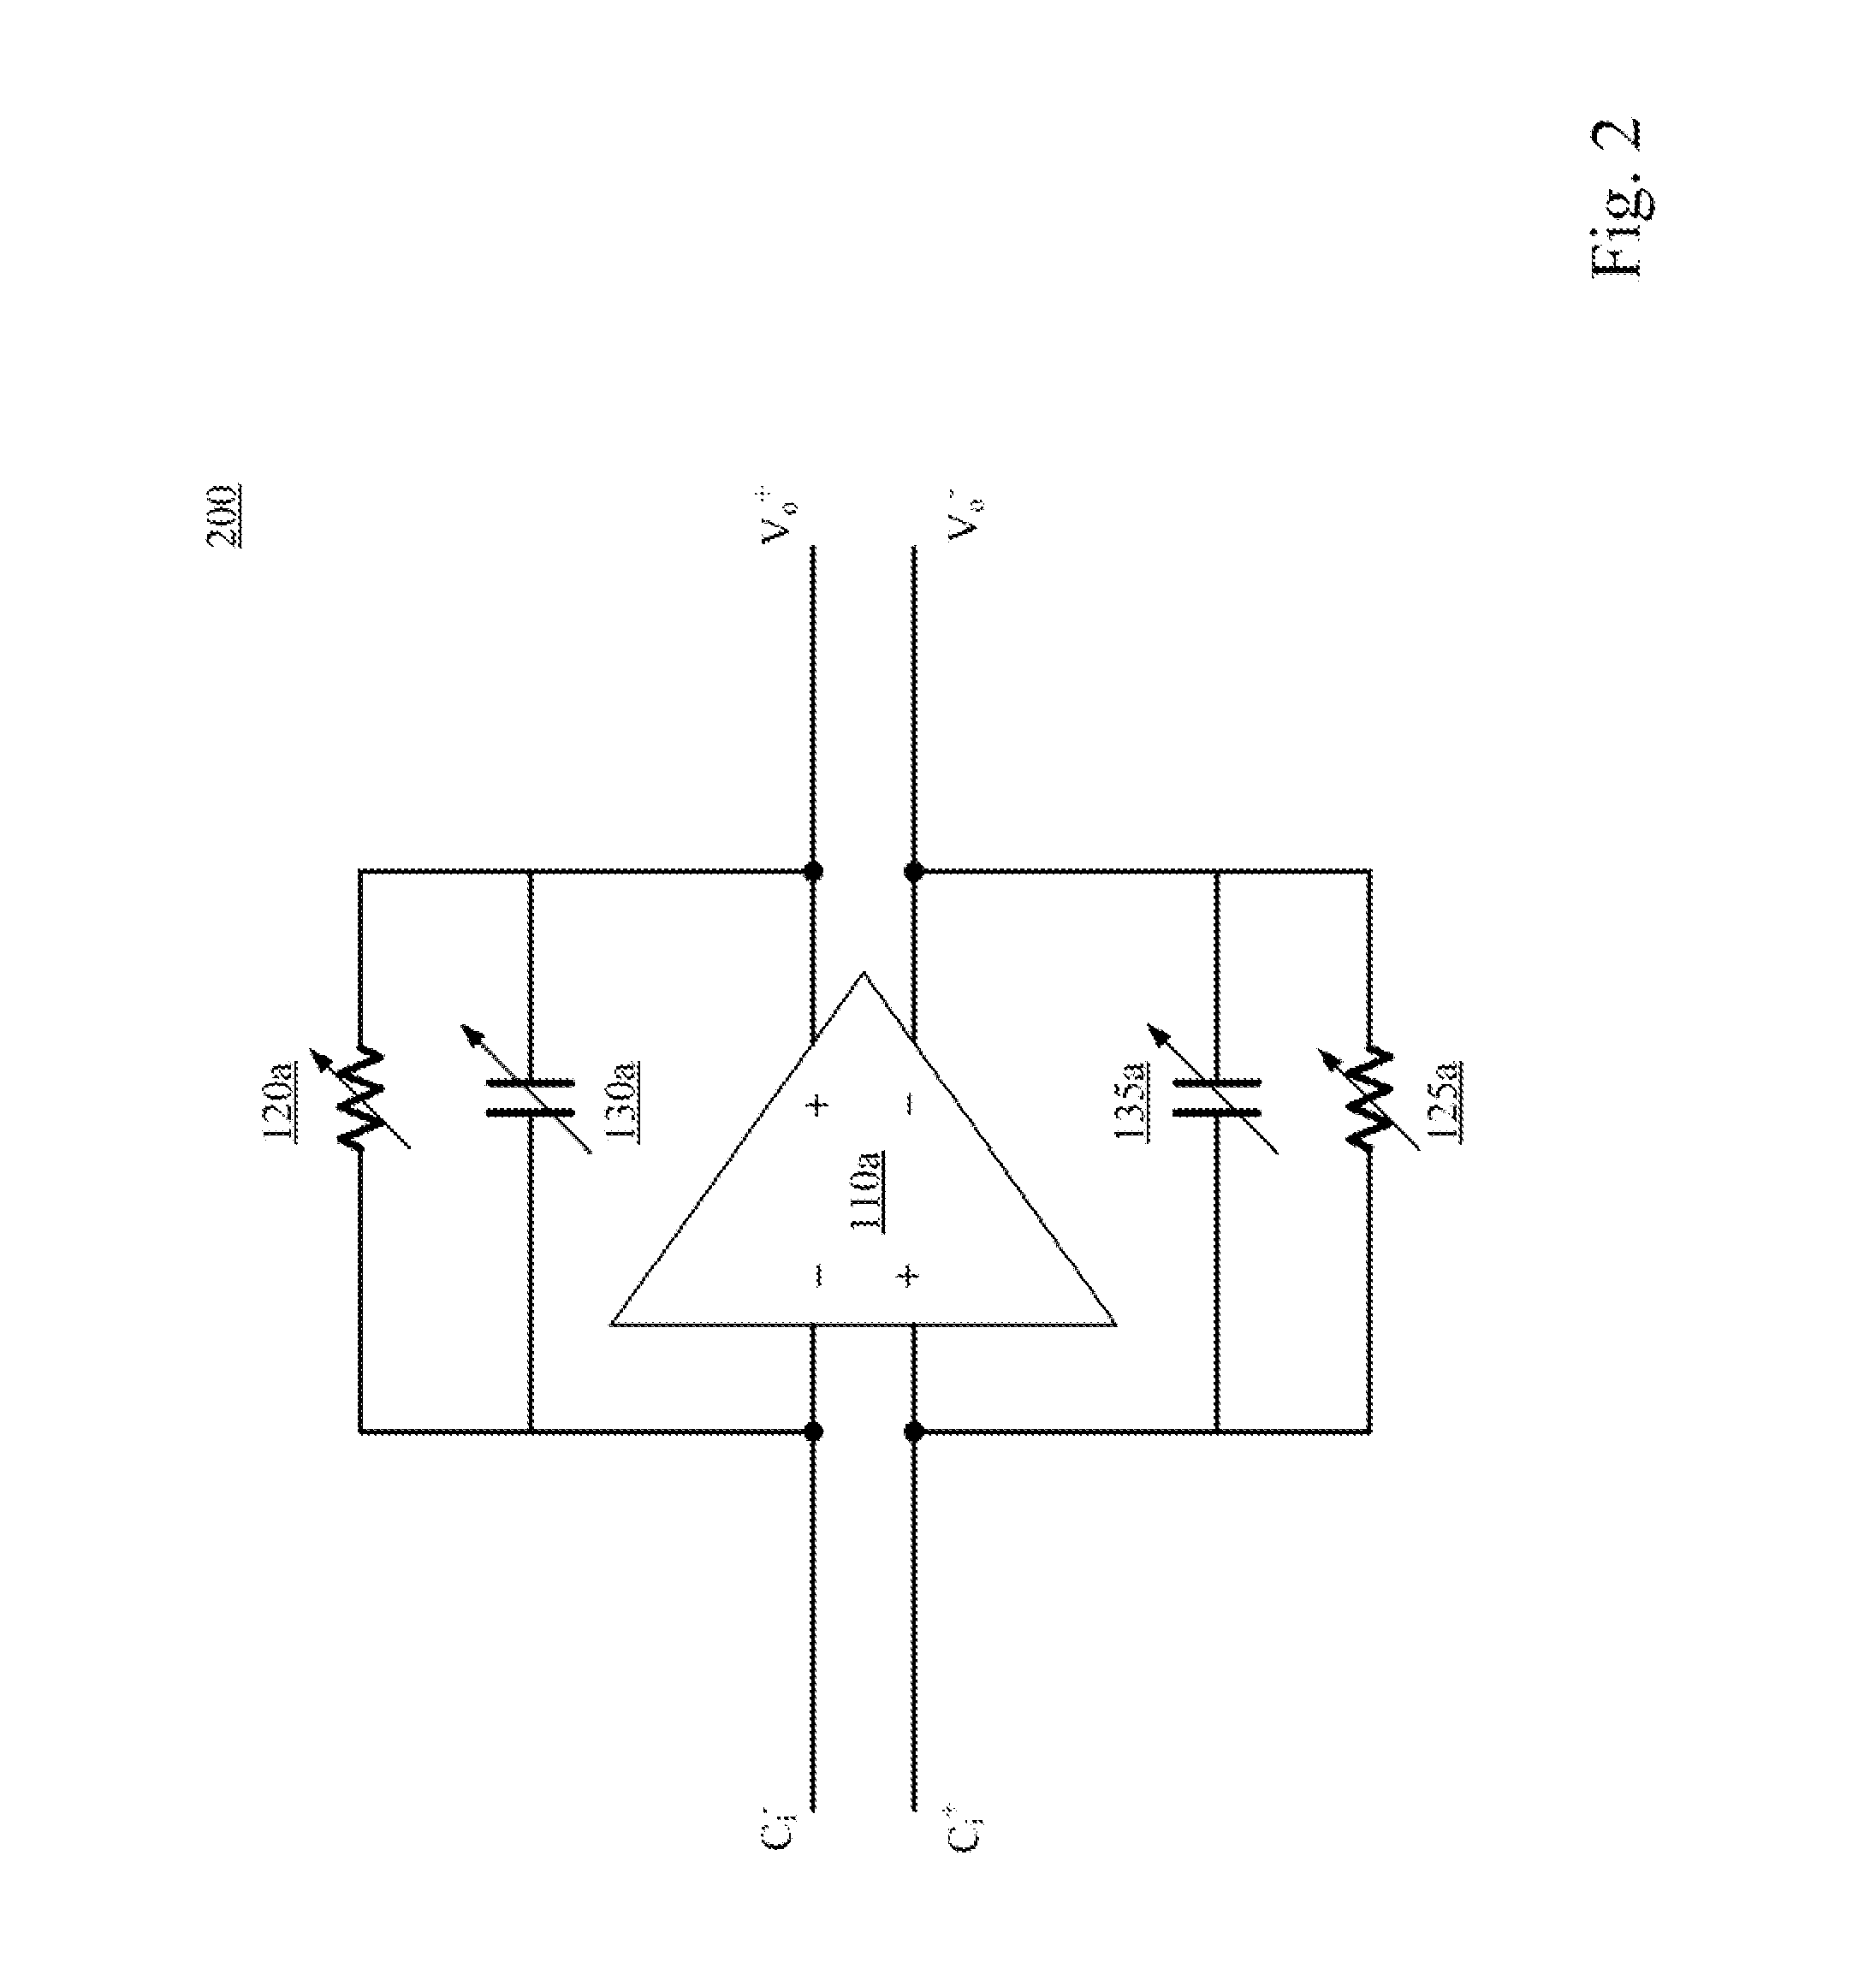 Operational transconductance amplifier, reconfigurable fully differential voltage sensing amplifier and reconfigurable fully differential capacitive sensing amplifier